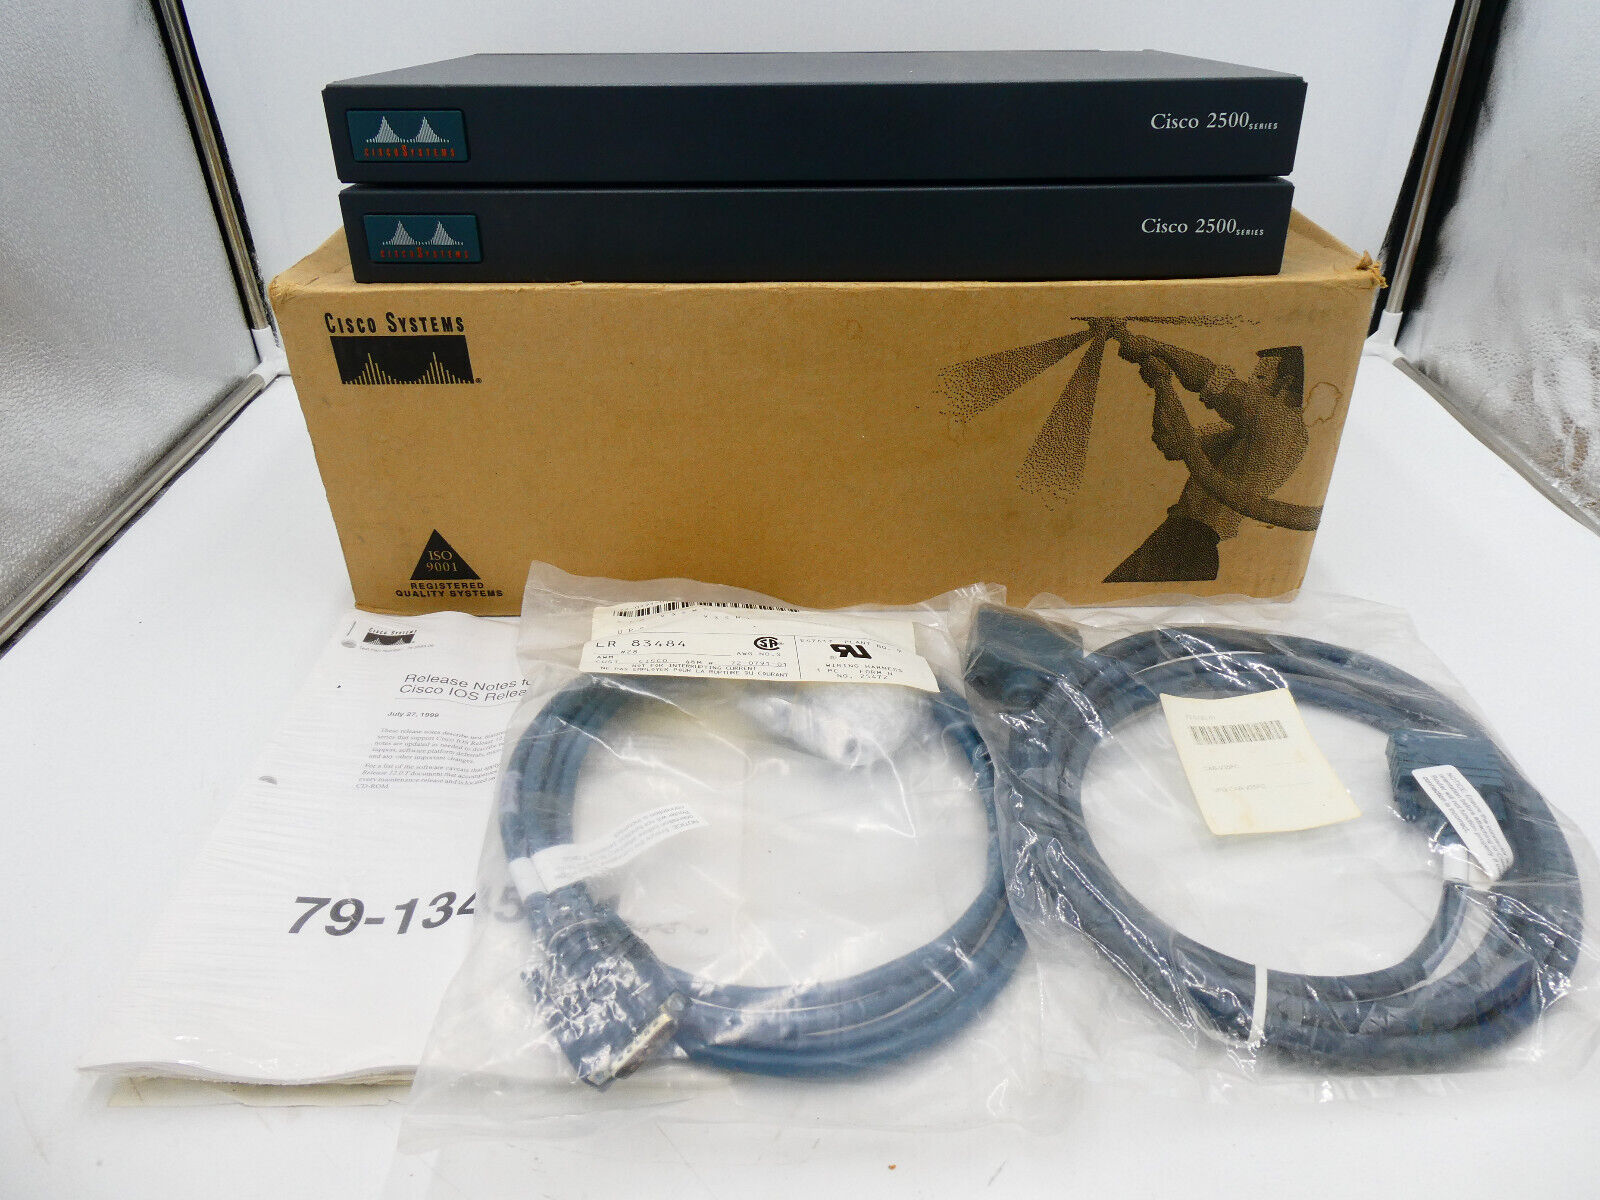 🍀 RARE NEW CISCO 2500 Series 2501 2514 Ethernet Router Pair MUSEUM COLLECTION